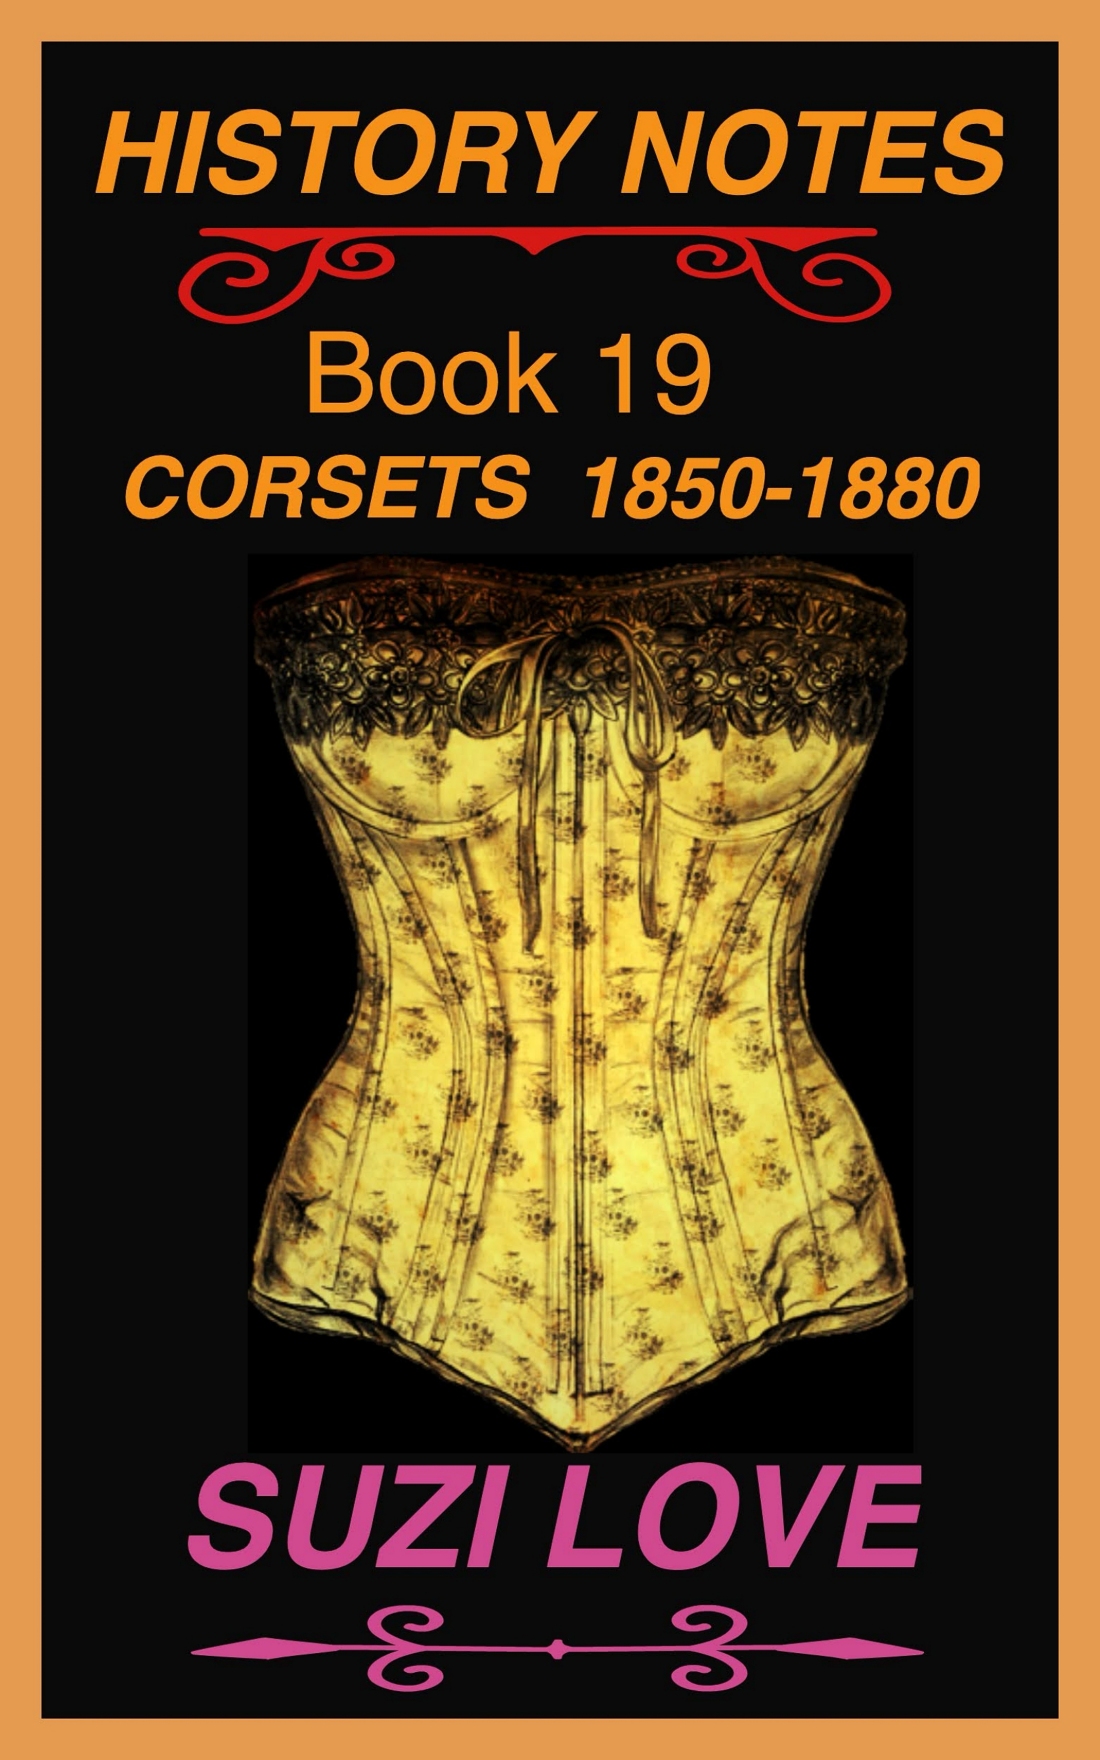 Corsets 1850-1880 History Notes Book 19 Towards the end of the 1800s, corsets changed to give a fashionable silhouette and be a decorative fashion item. Tight lacing helped give a narrow waist and a feminine form under clothing while decorative corsets became desirable fashion items. Victorian corsets for small waists and fashionable silhouettes. Corsets during the Victorian Era, or late 1800s, tightened to give tiny waists and fashionable silhouettes. https://books2read.com/SuziLoveCorsetBook19